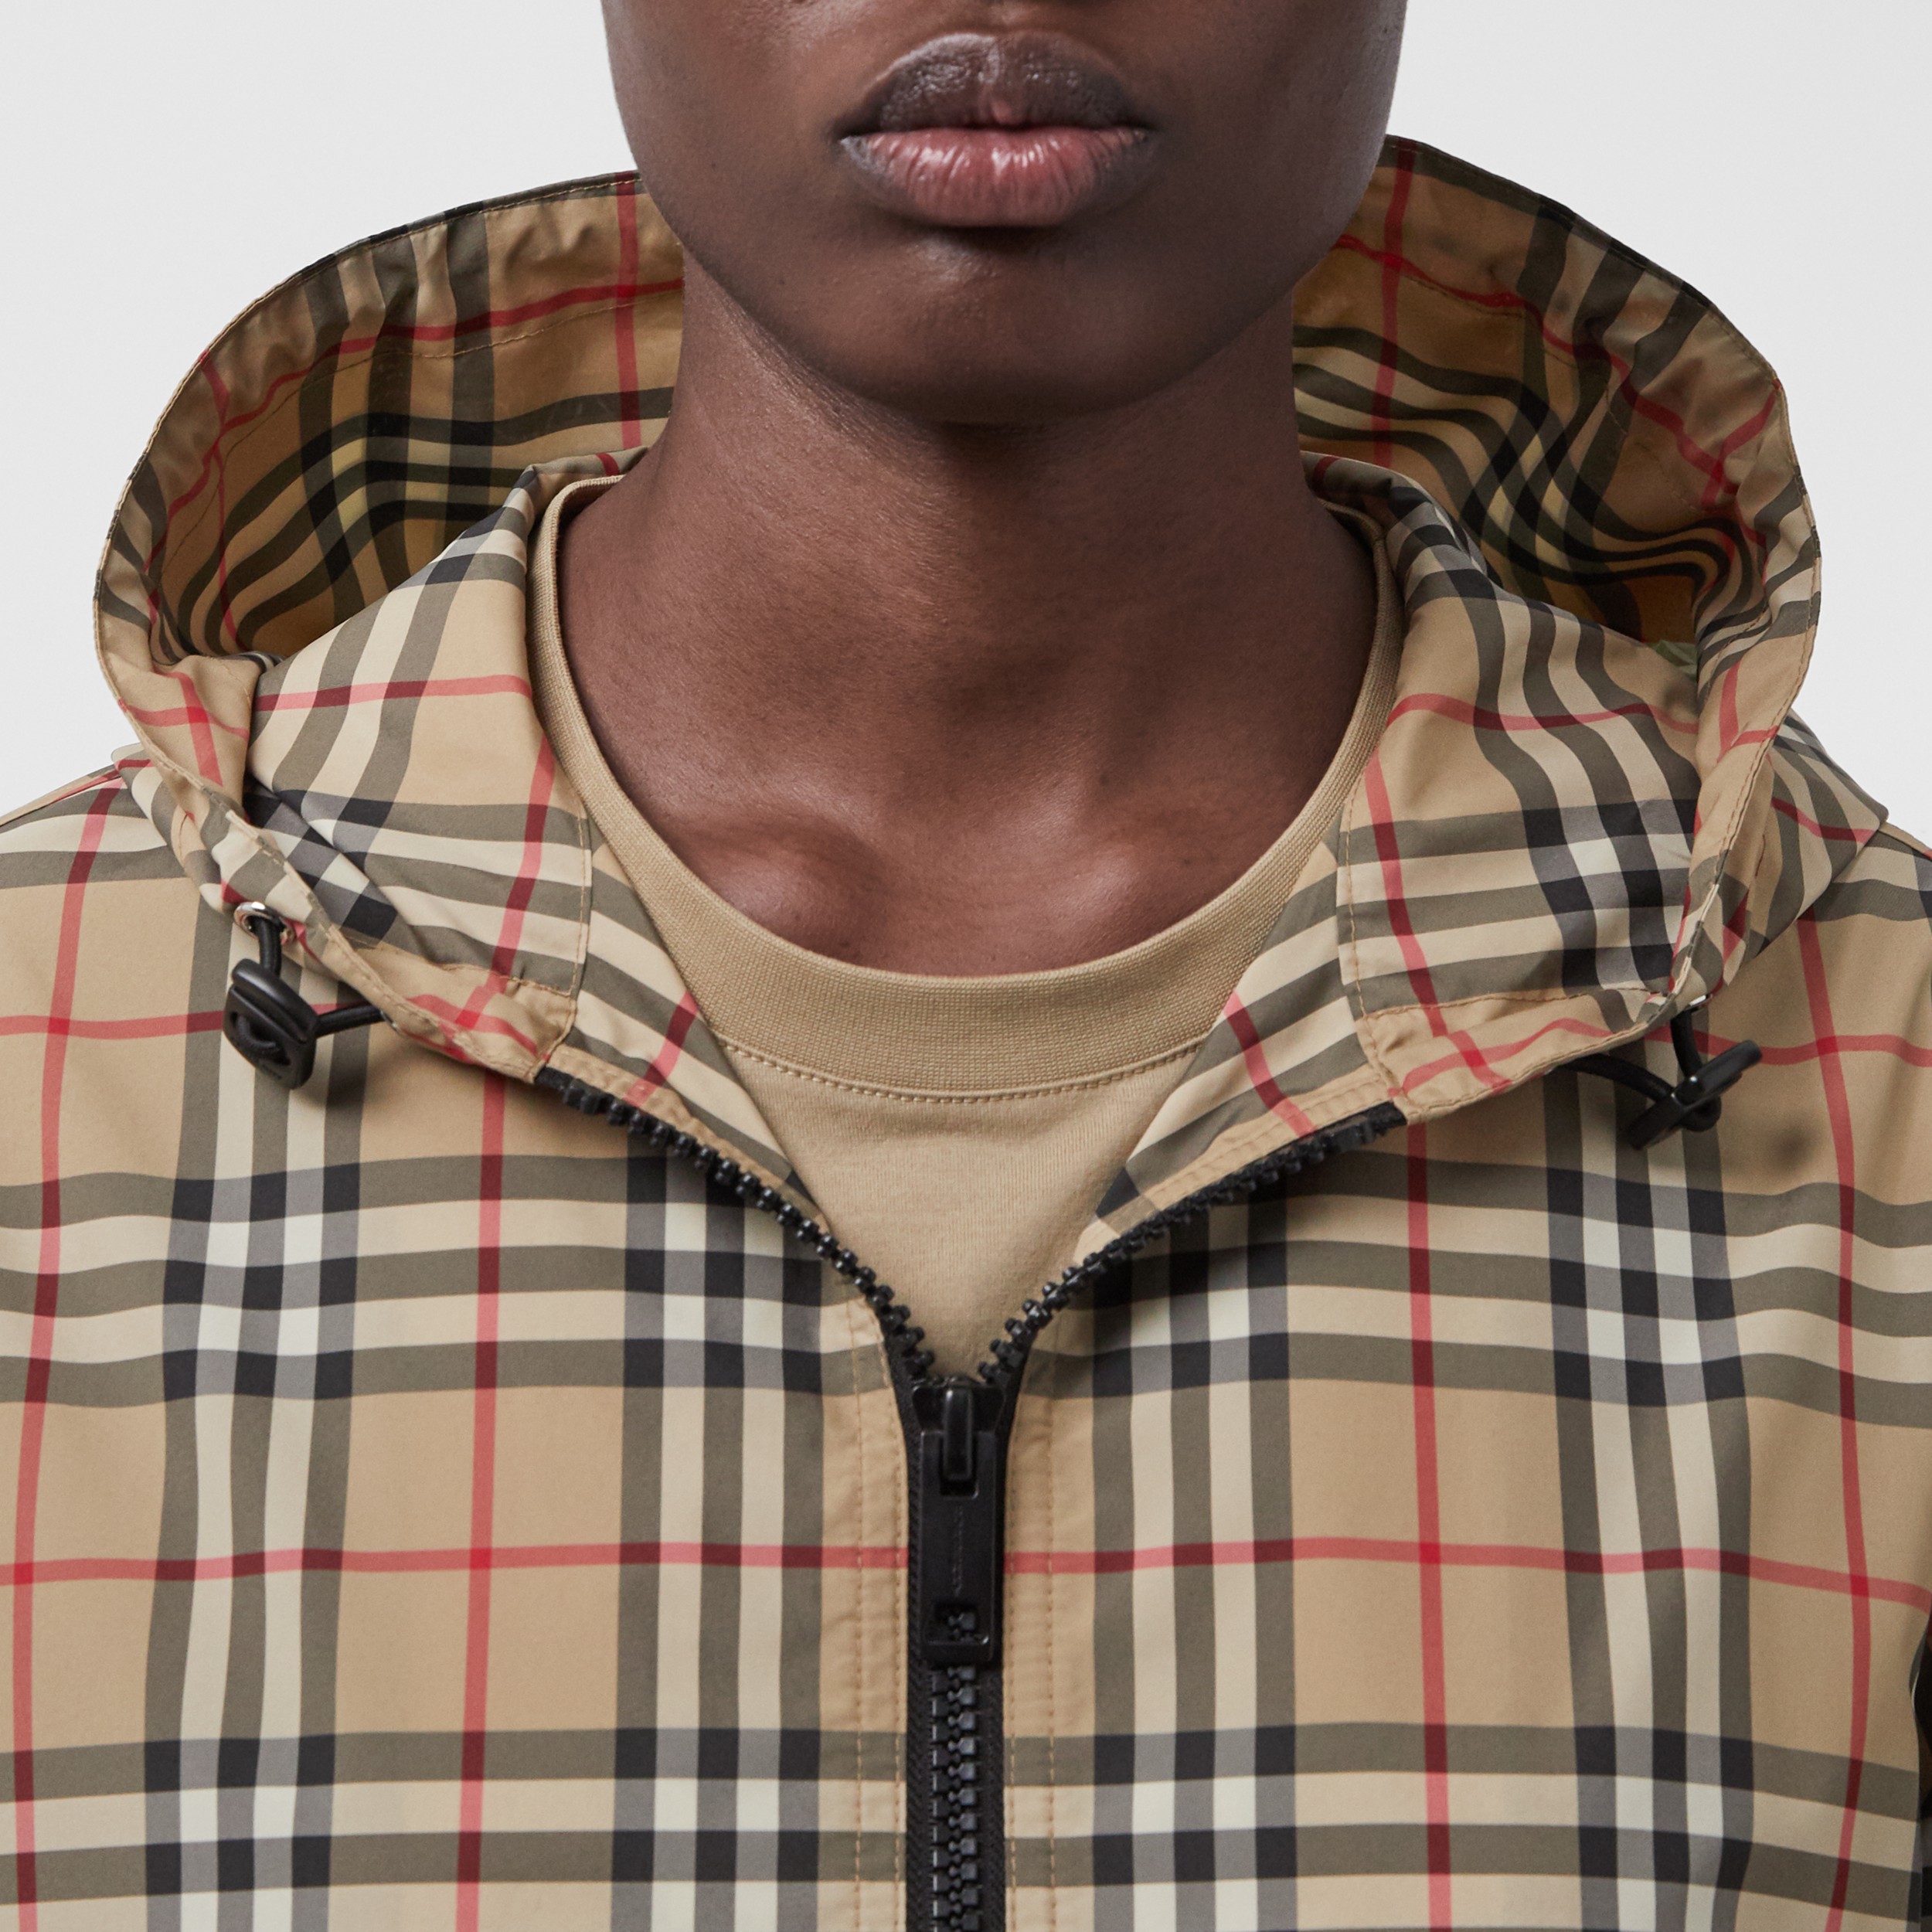 Vintage Check Polyester Hooded Jacket in Archive Beige - Women | Burberry Kong S.A.R., China